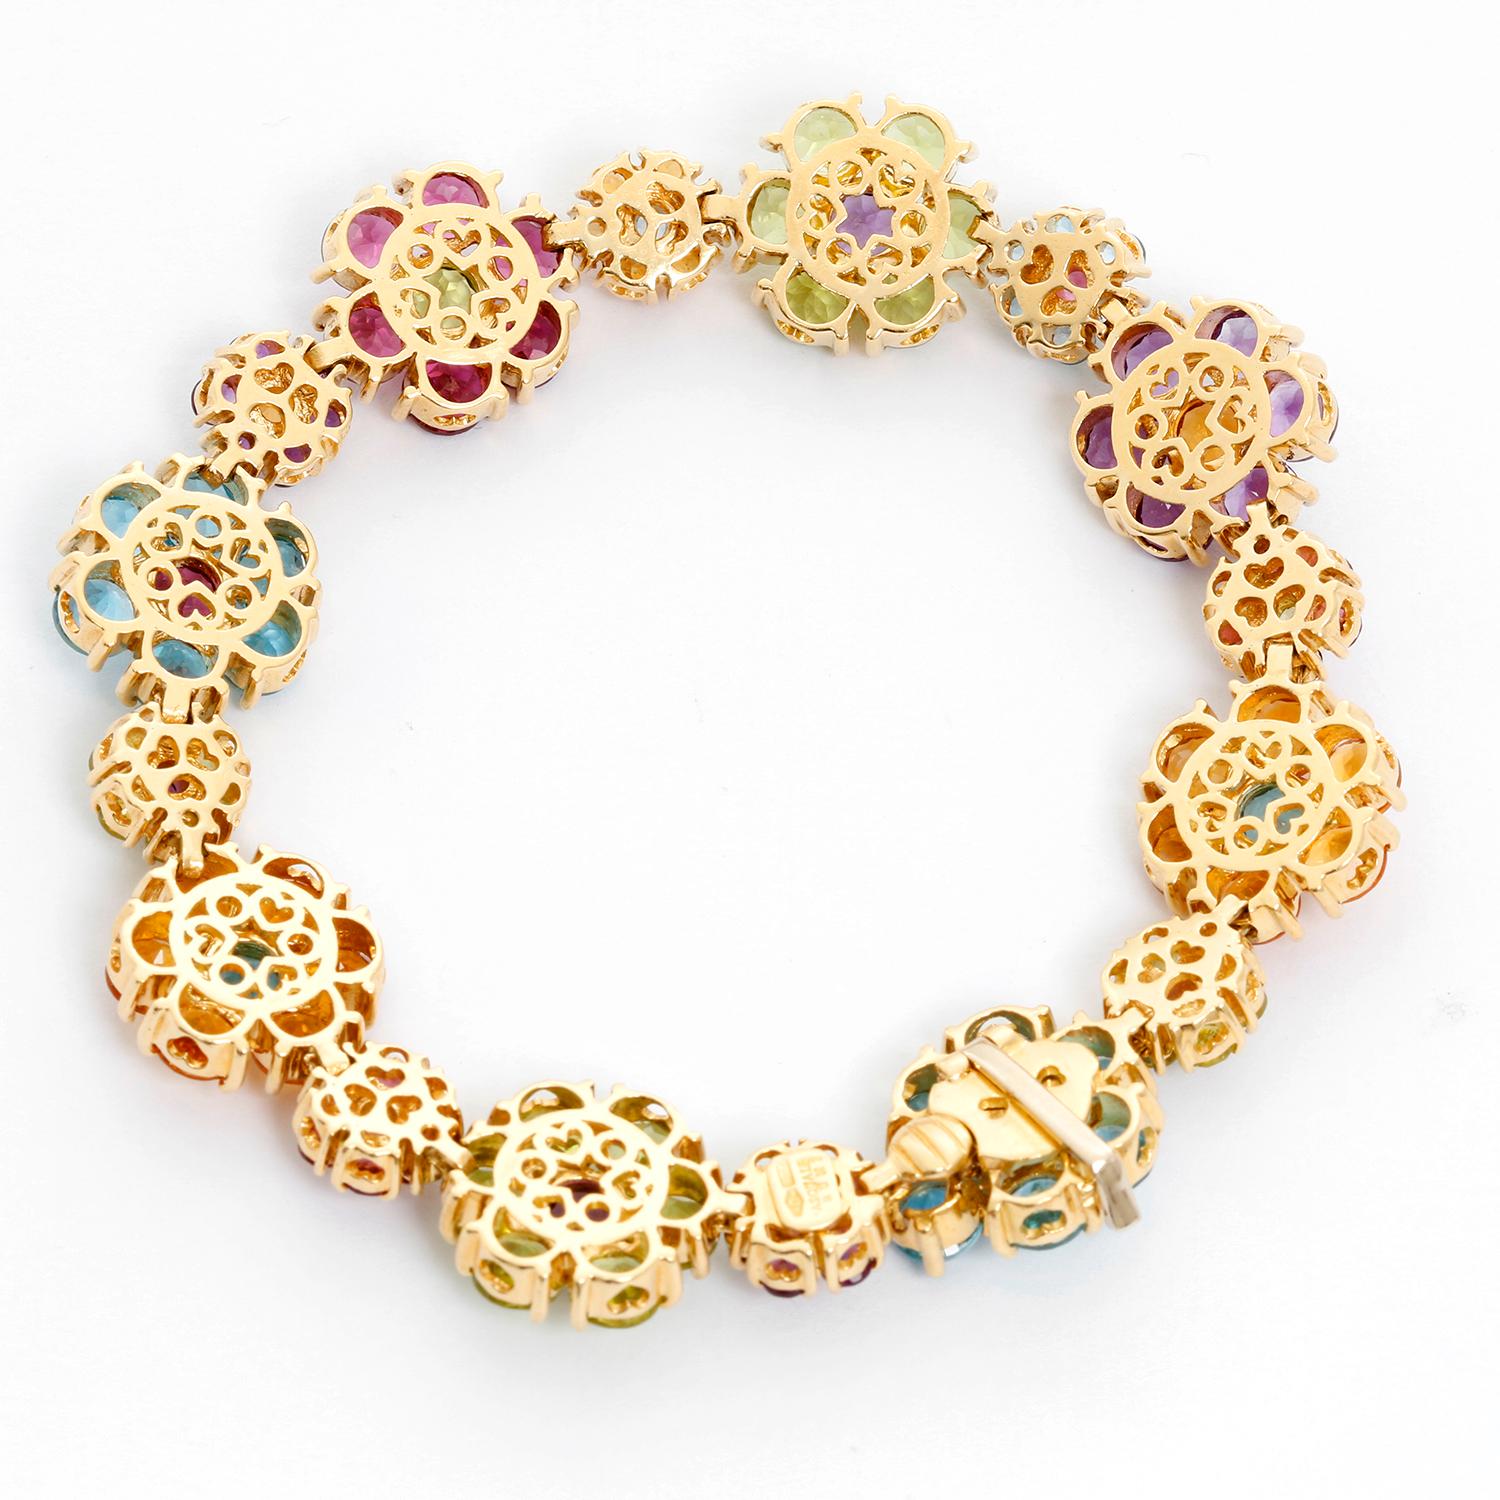 Pasquale Bruni Multistone Floral Bracelet  - Beautiful 18K Yellow gold link bracelet with Topaz, Amethyst, Tourmaline, Citrine, Peridot and iolite flowers. Hallmarked; Makers mark,  750. Total weight 37.2 grams. Wrist size 7 inches .